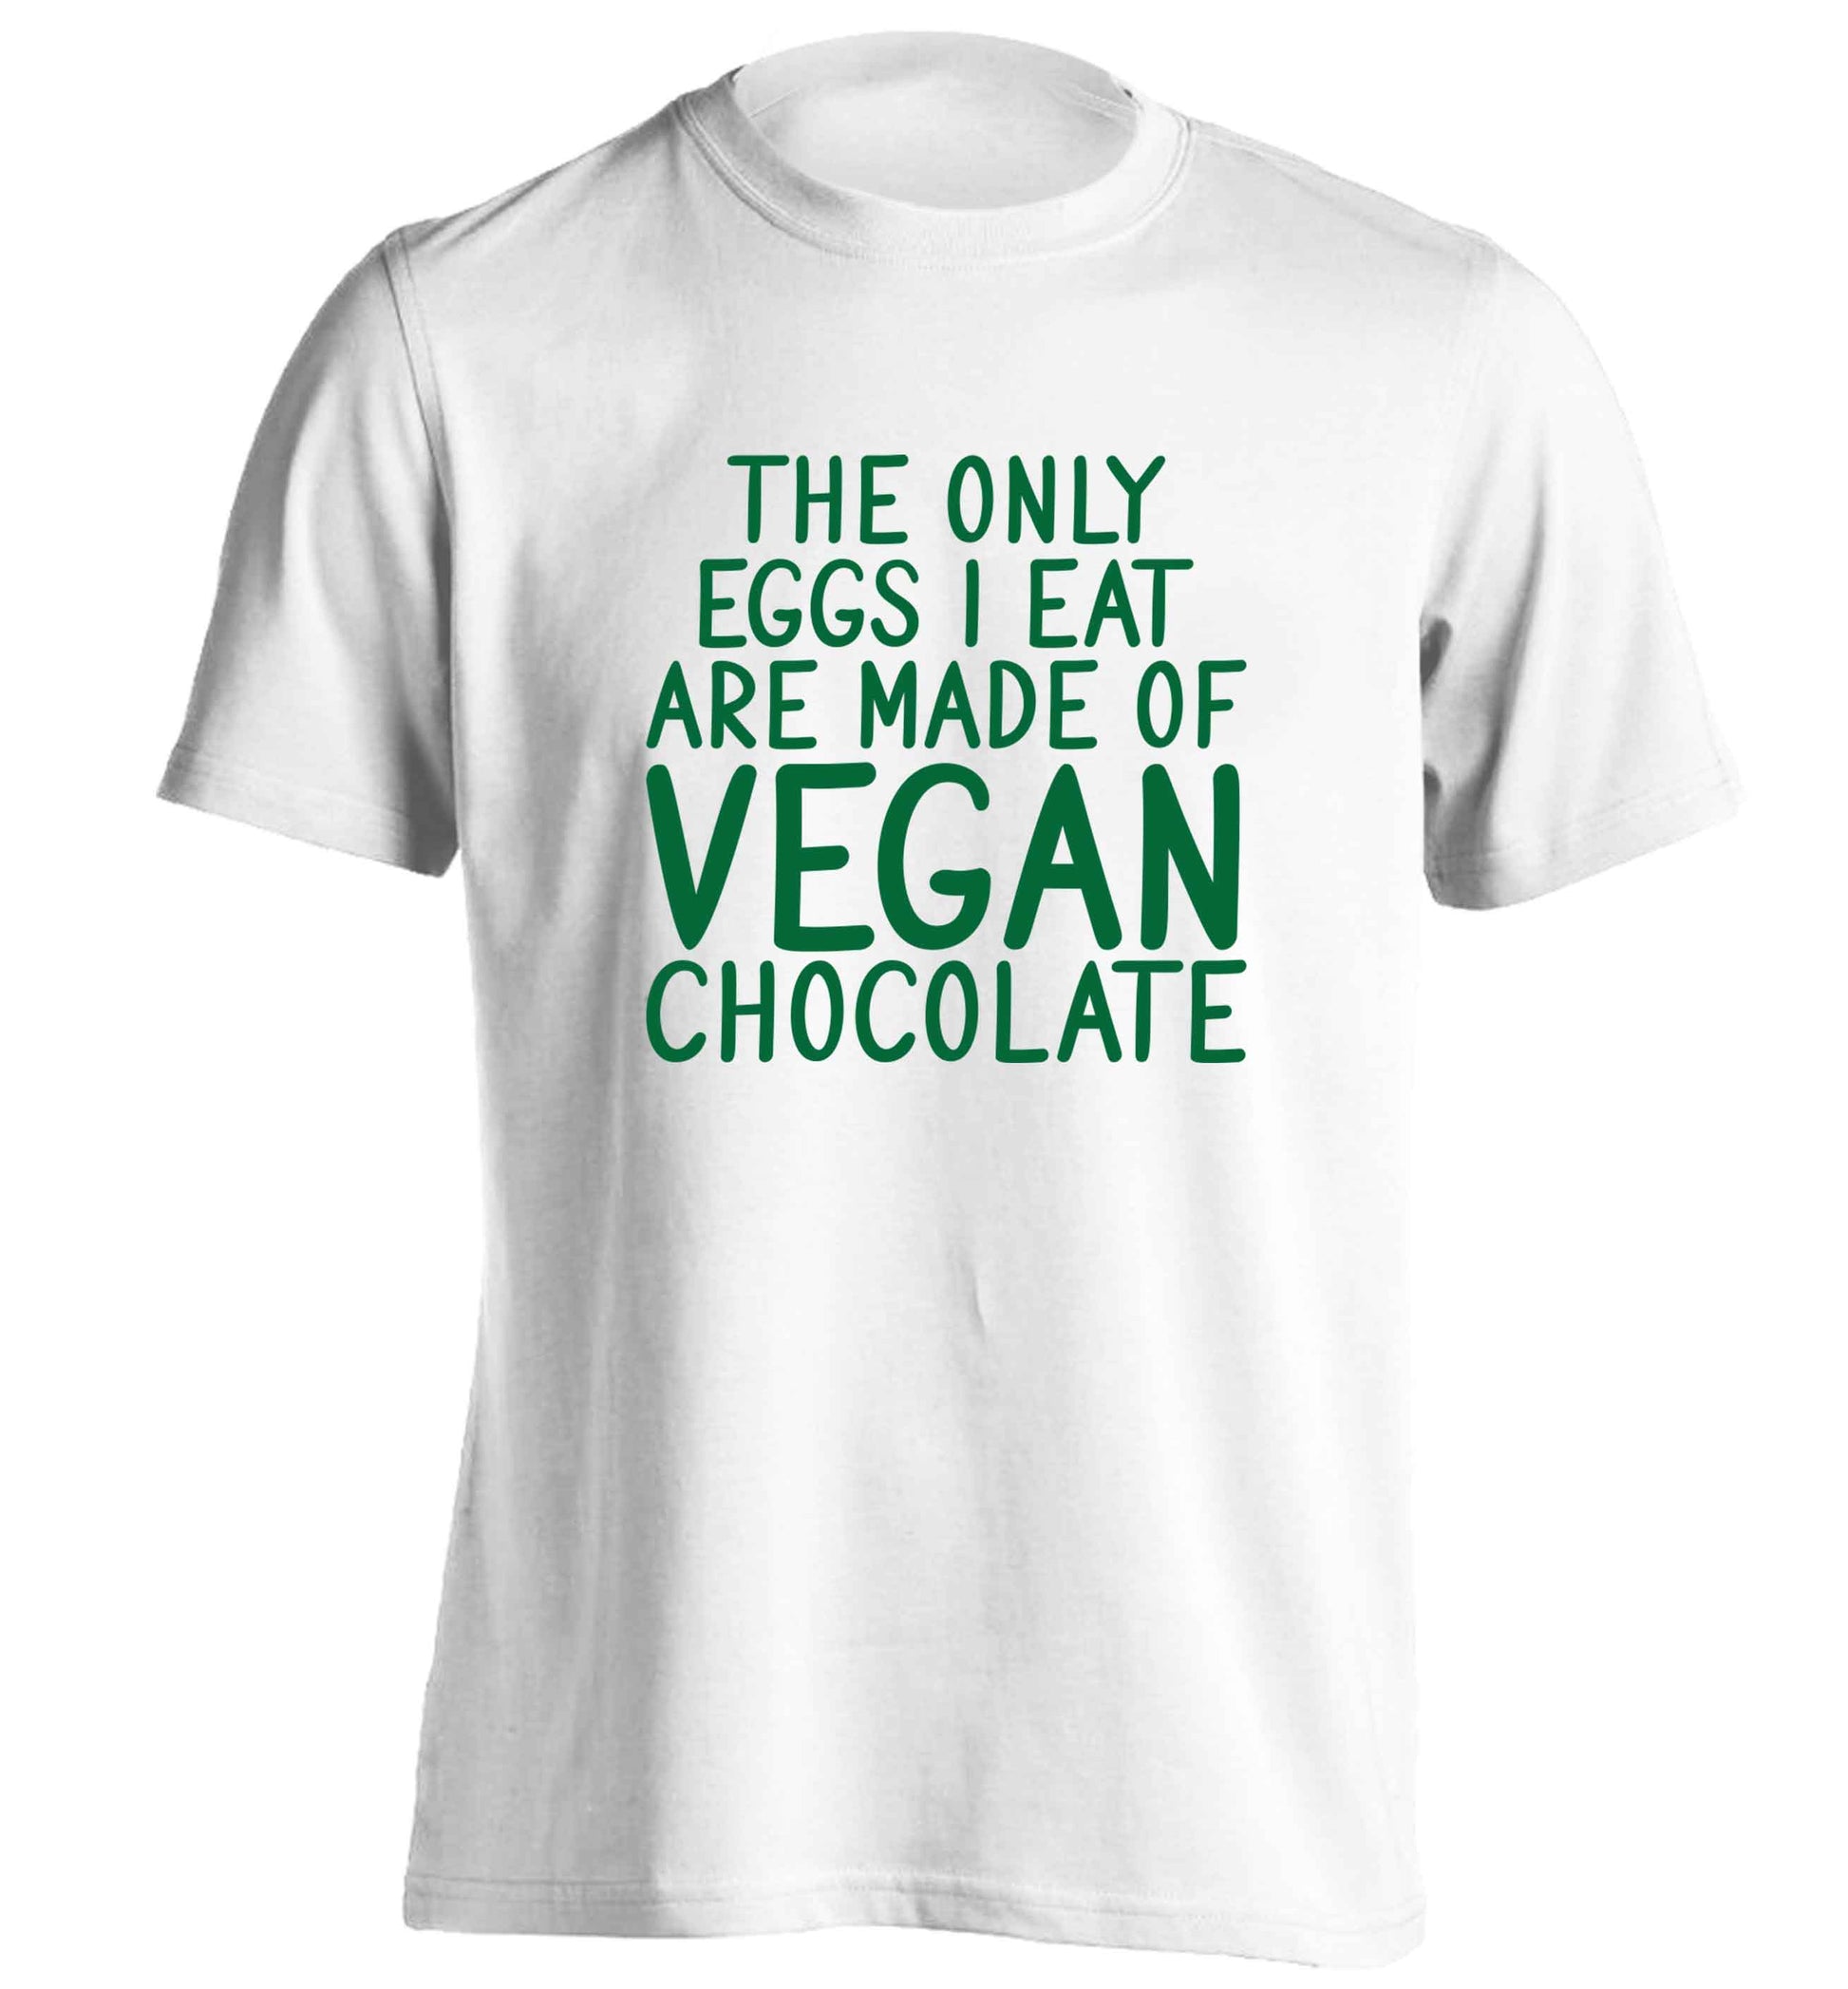 The only eggs I eat are made of vegan chocolate adults unisex white Tshirt 2XL